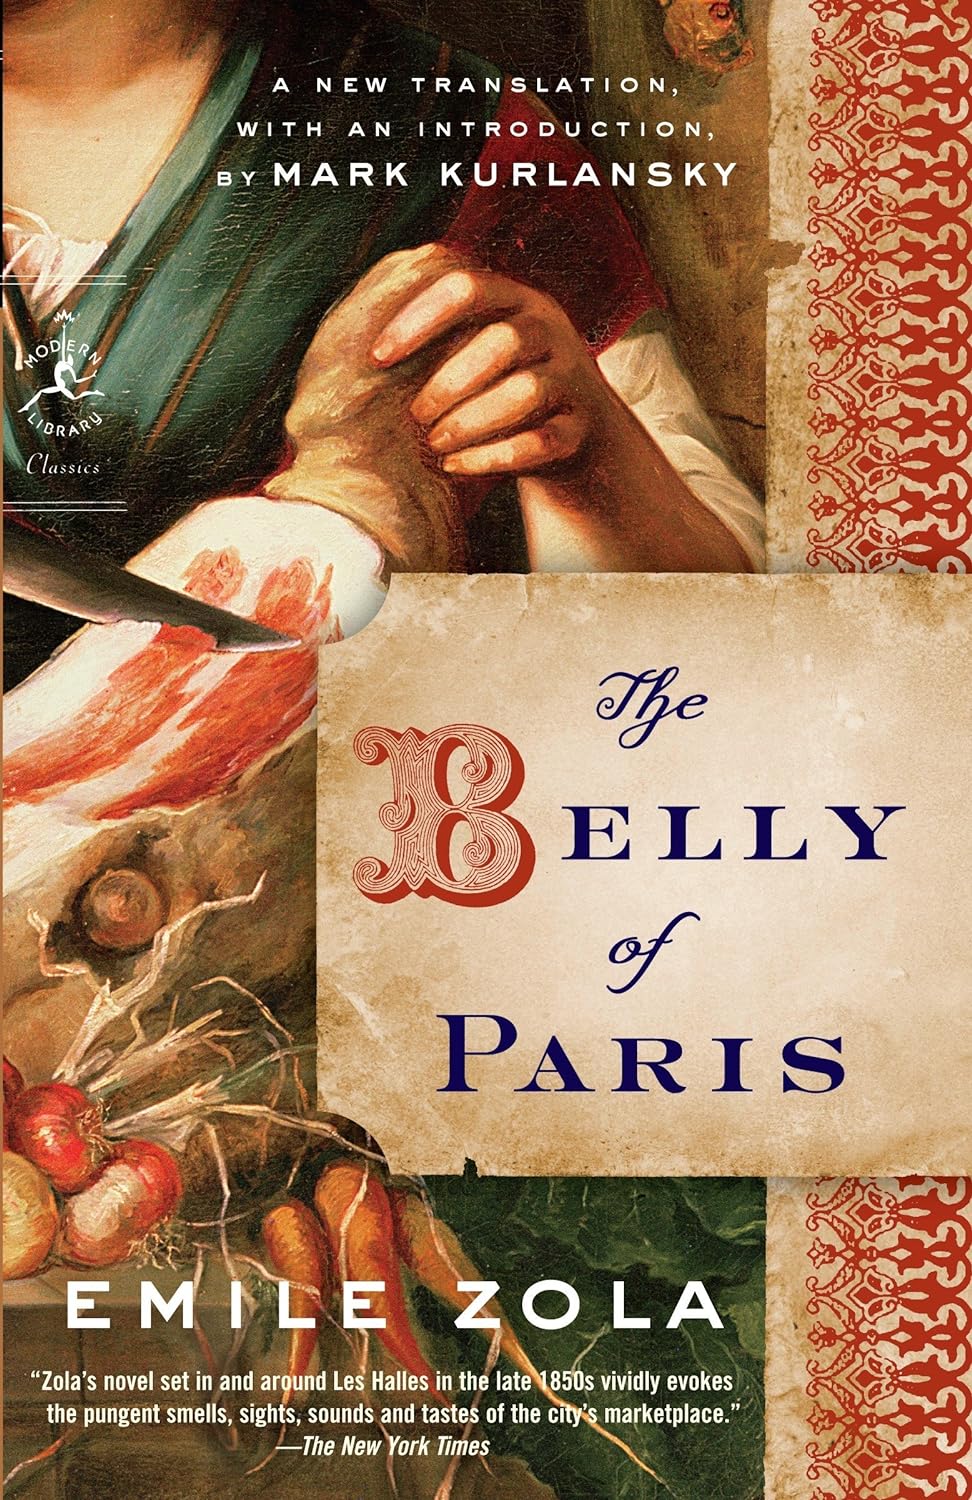 The Belly of Paris:  By Emile Zola a new translation with an introduction by Mark Kurlansky.